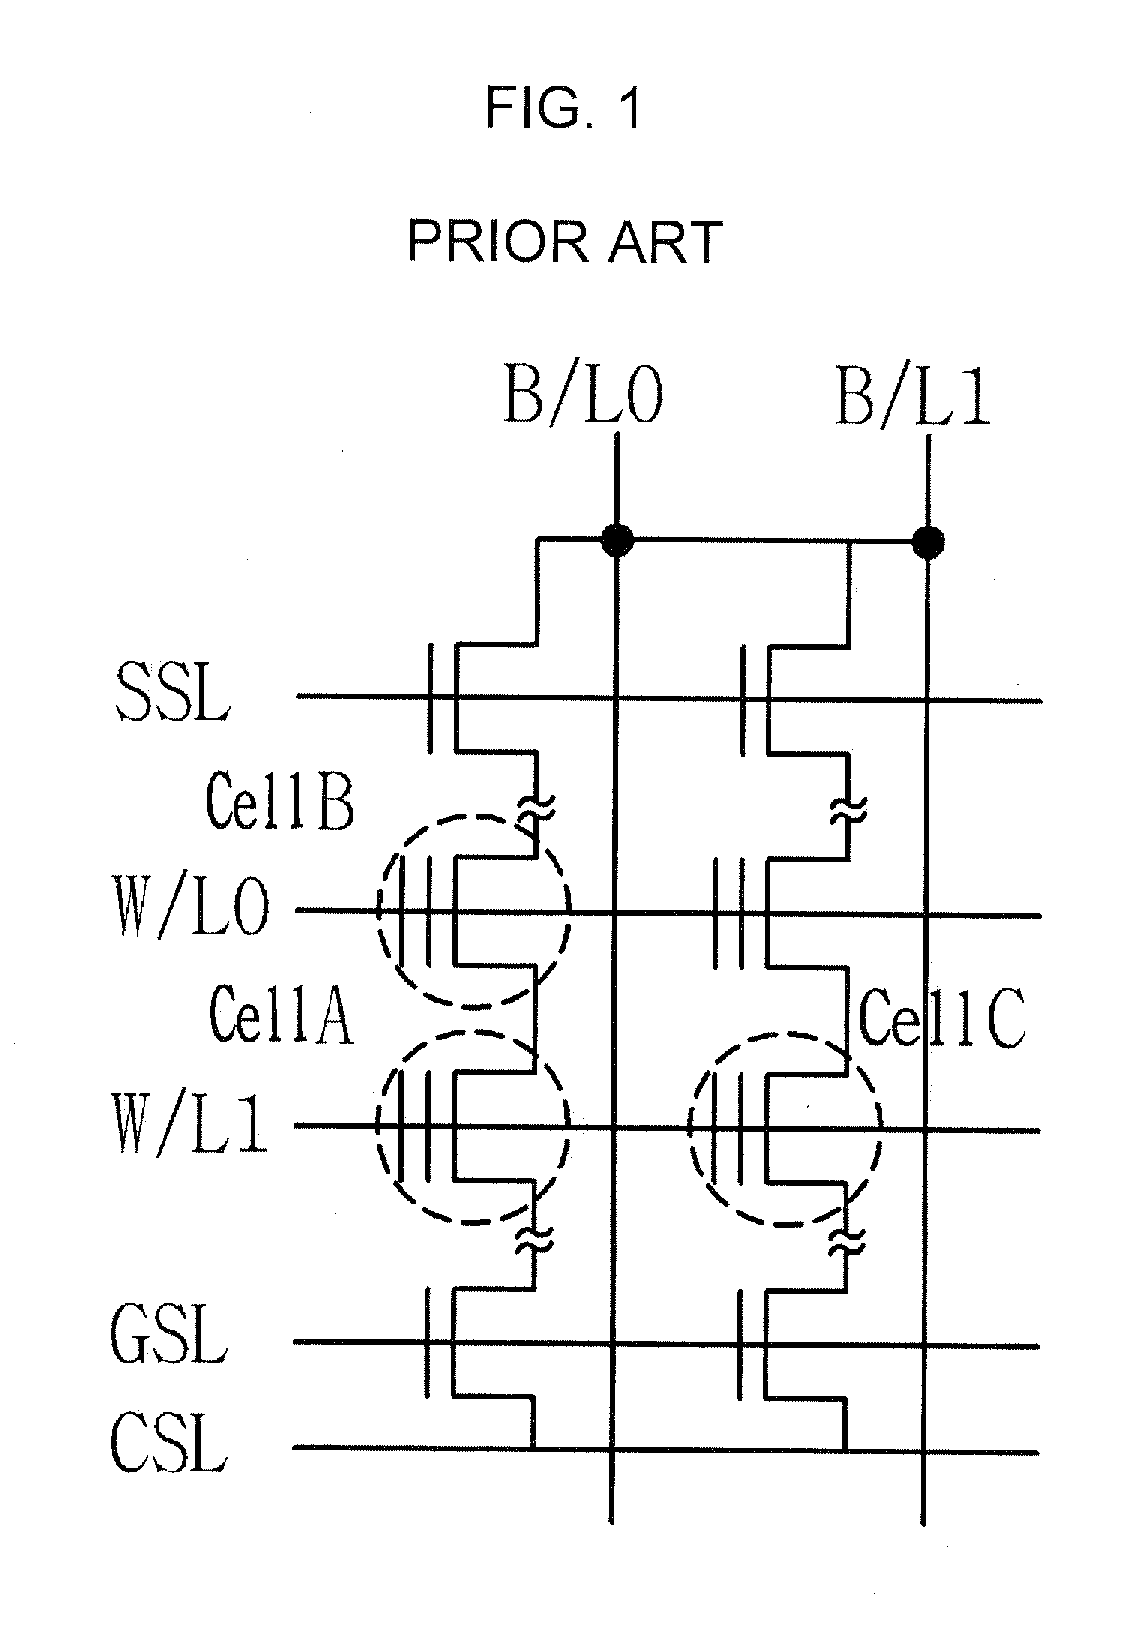 NAND type flash memory array and method for operating the same